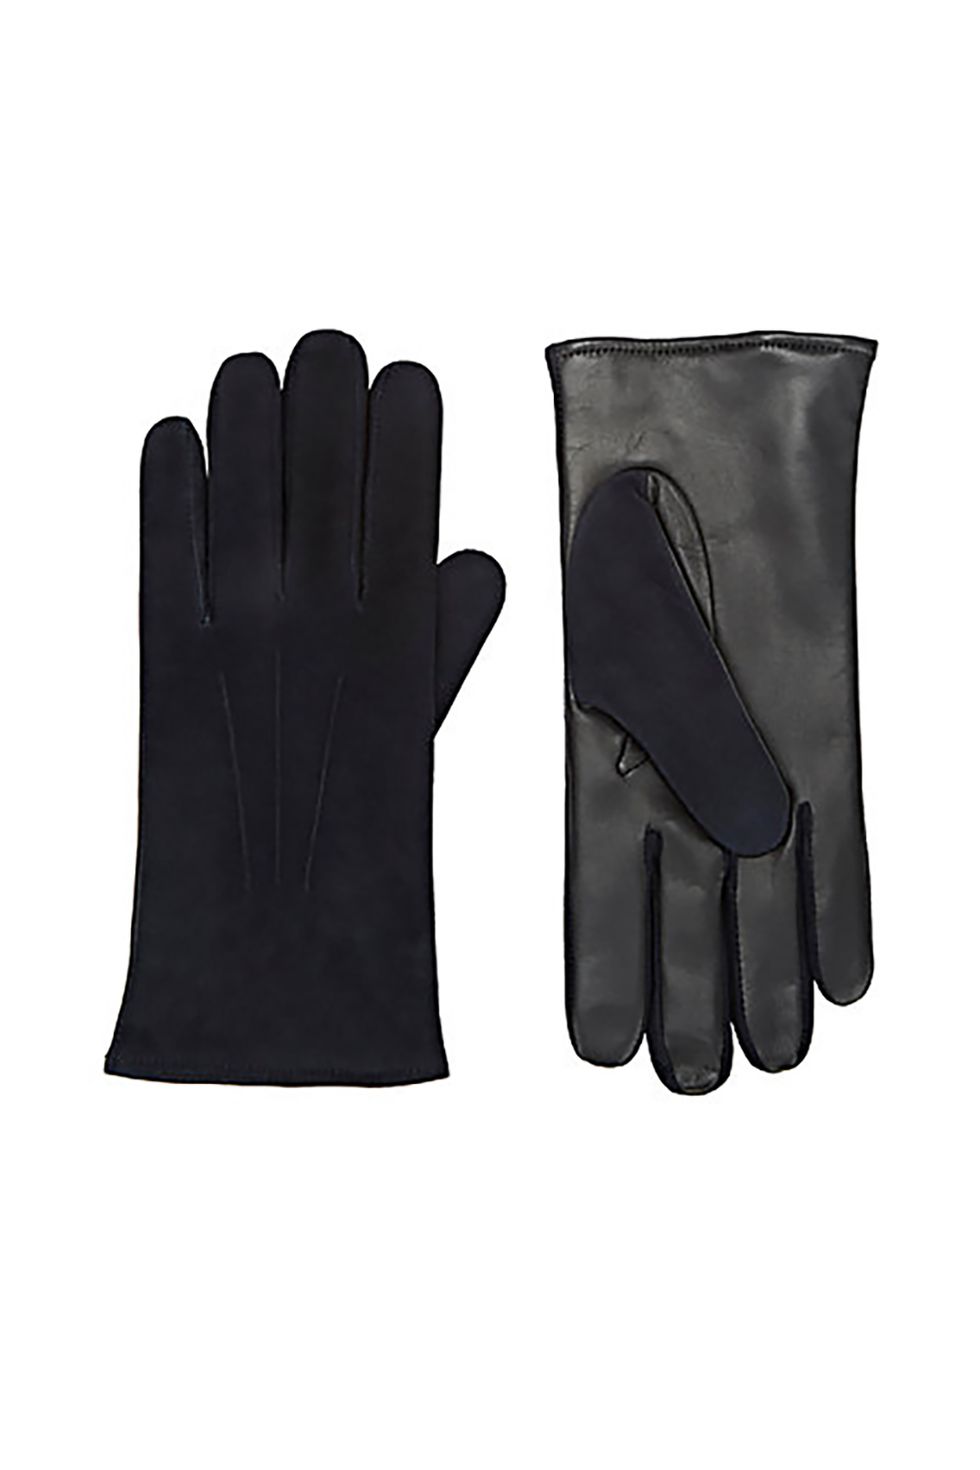 <p>Well, if one doesn't fall out of your pocket, you'll never have to buy another pair again.</p><p>$225, <a href="http://www.barneys.com/product/barneys-new-york-tech-smart-suede-gloves-504244465.html" target="_blank" data-tracking-id="recirc-text-link">barneys.com</a>.</p>